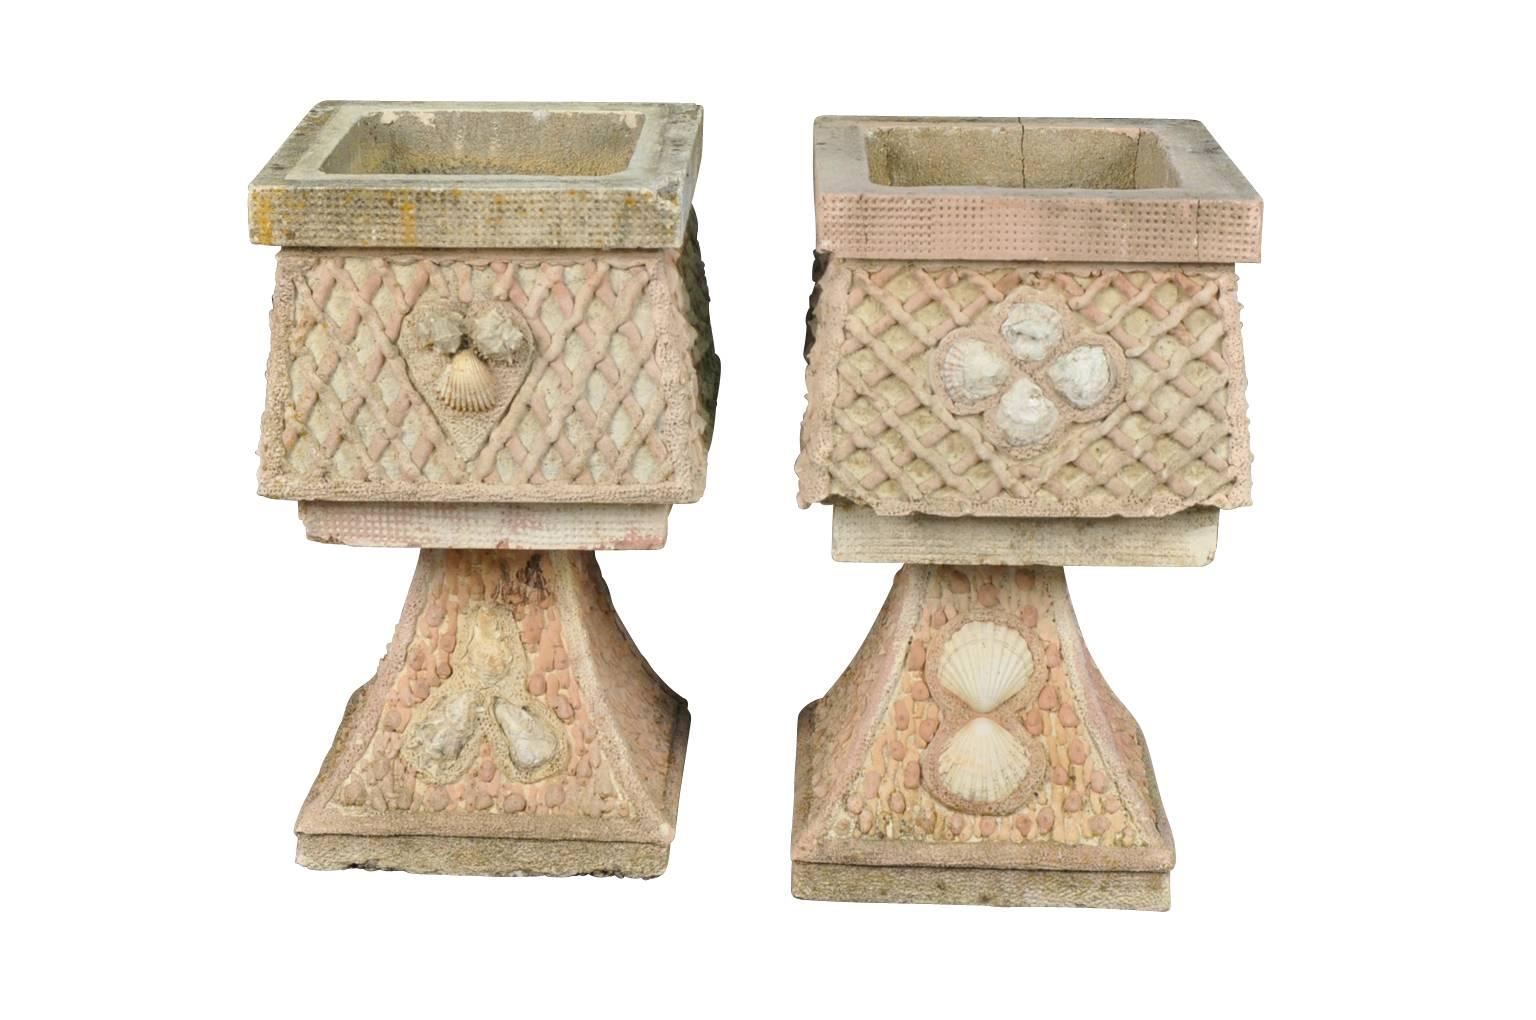 A sensational pair of vintage French jardinieres, planters from the South of France. Wonderfully constructed from coade stone and sea shells.